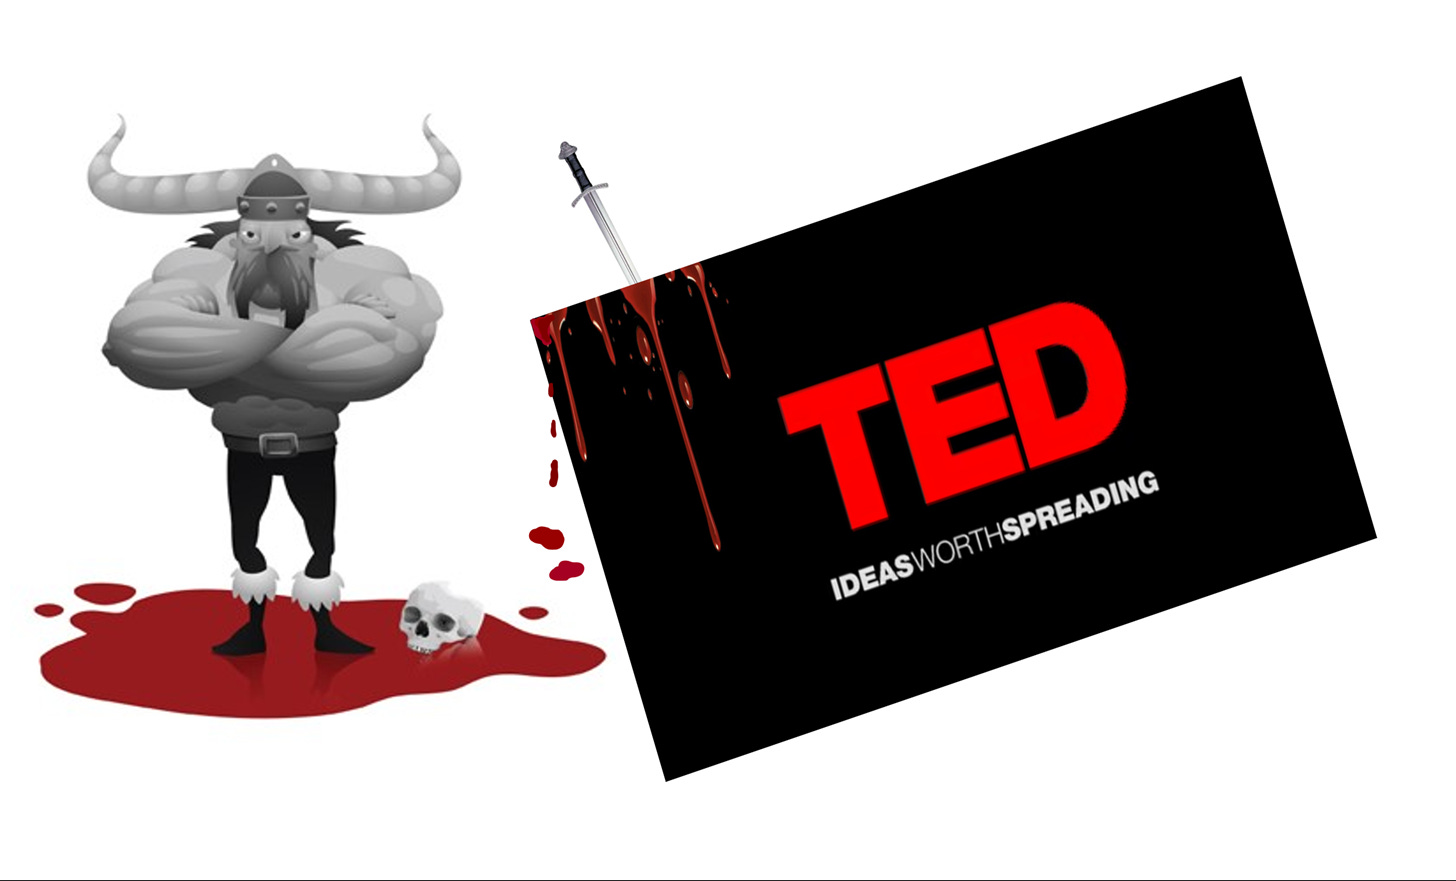 What if we gave a TED talk about Vikings?...